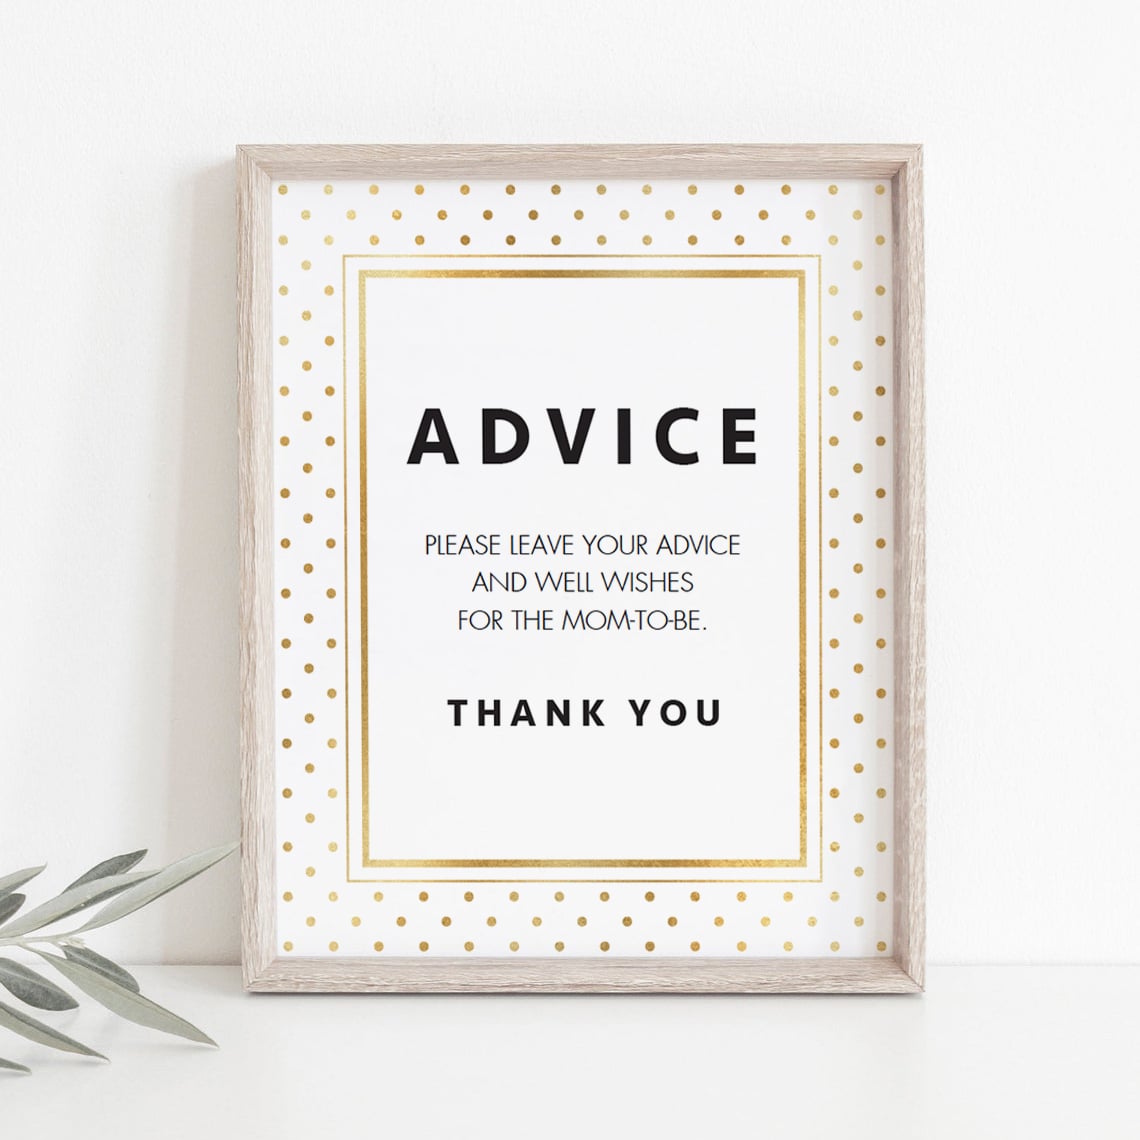 Neutral shower sign for advice cards by LittleSizzle